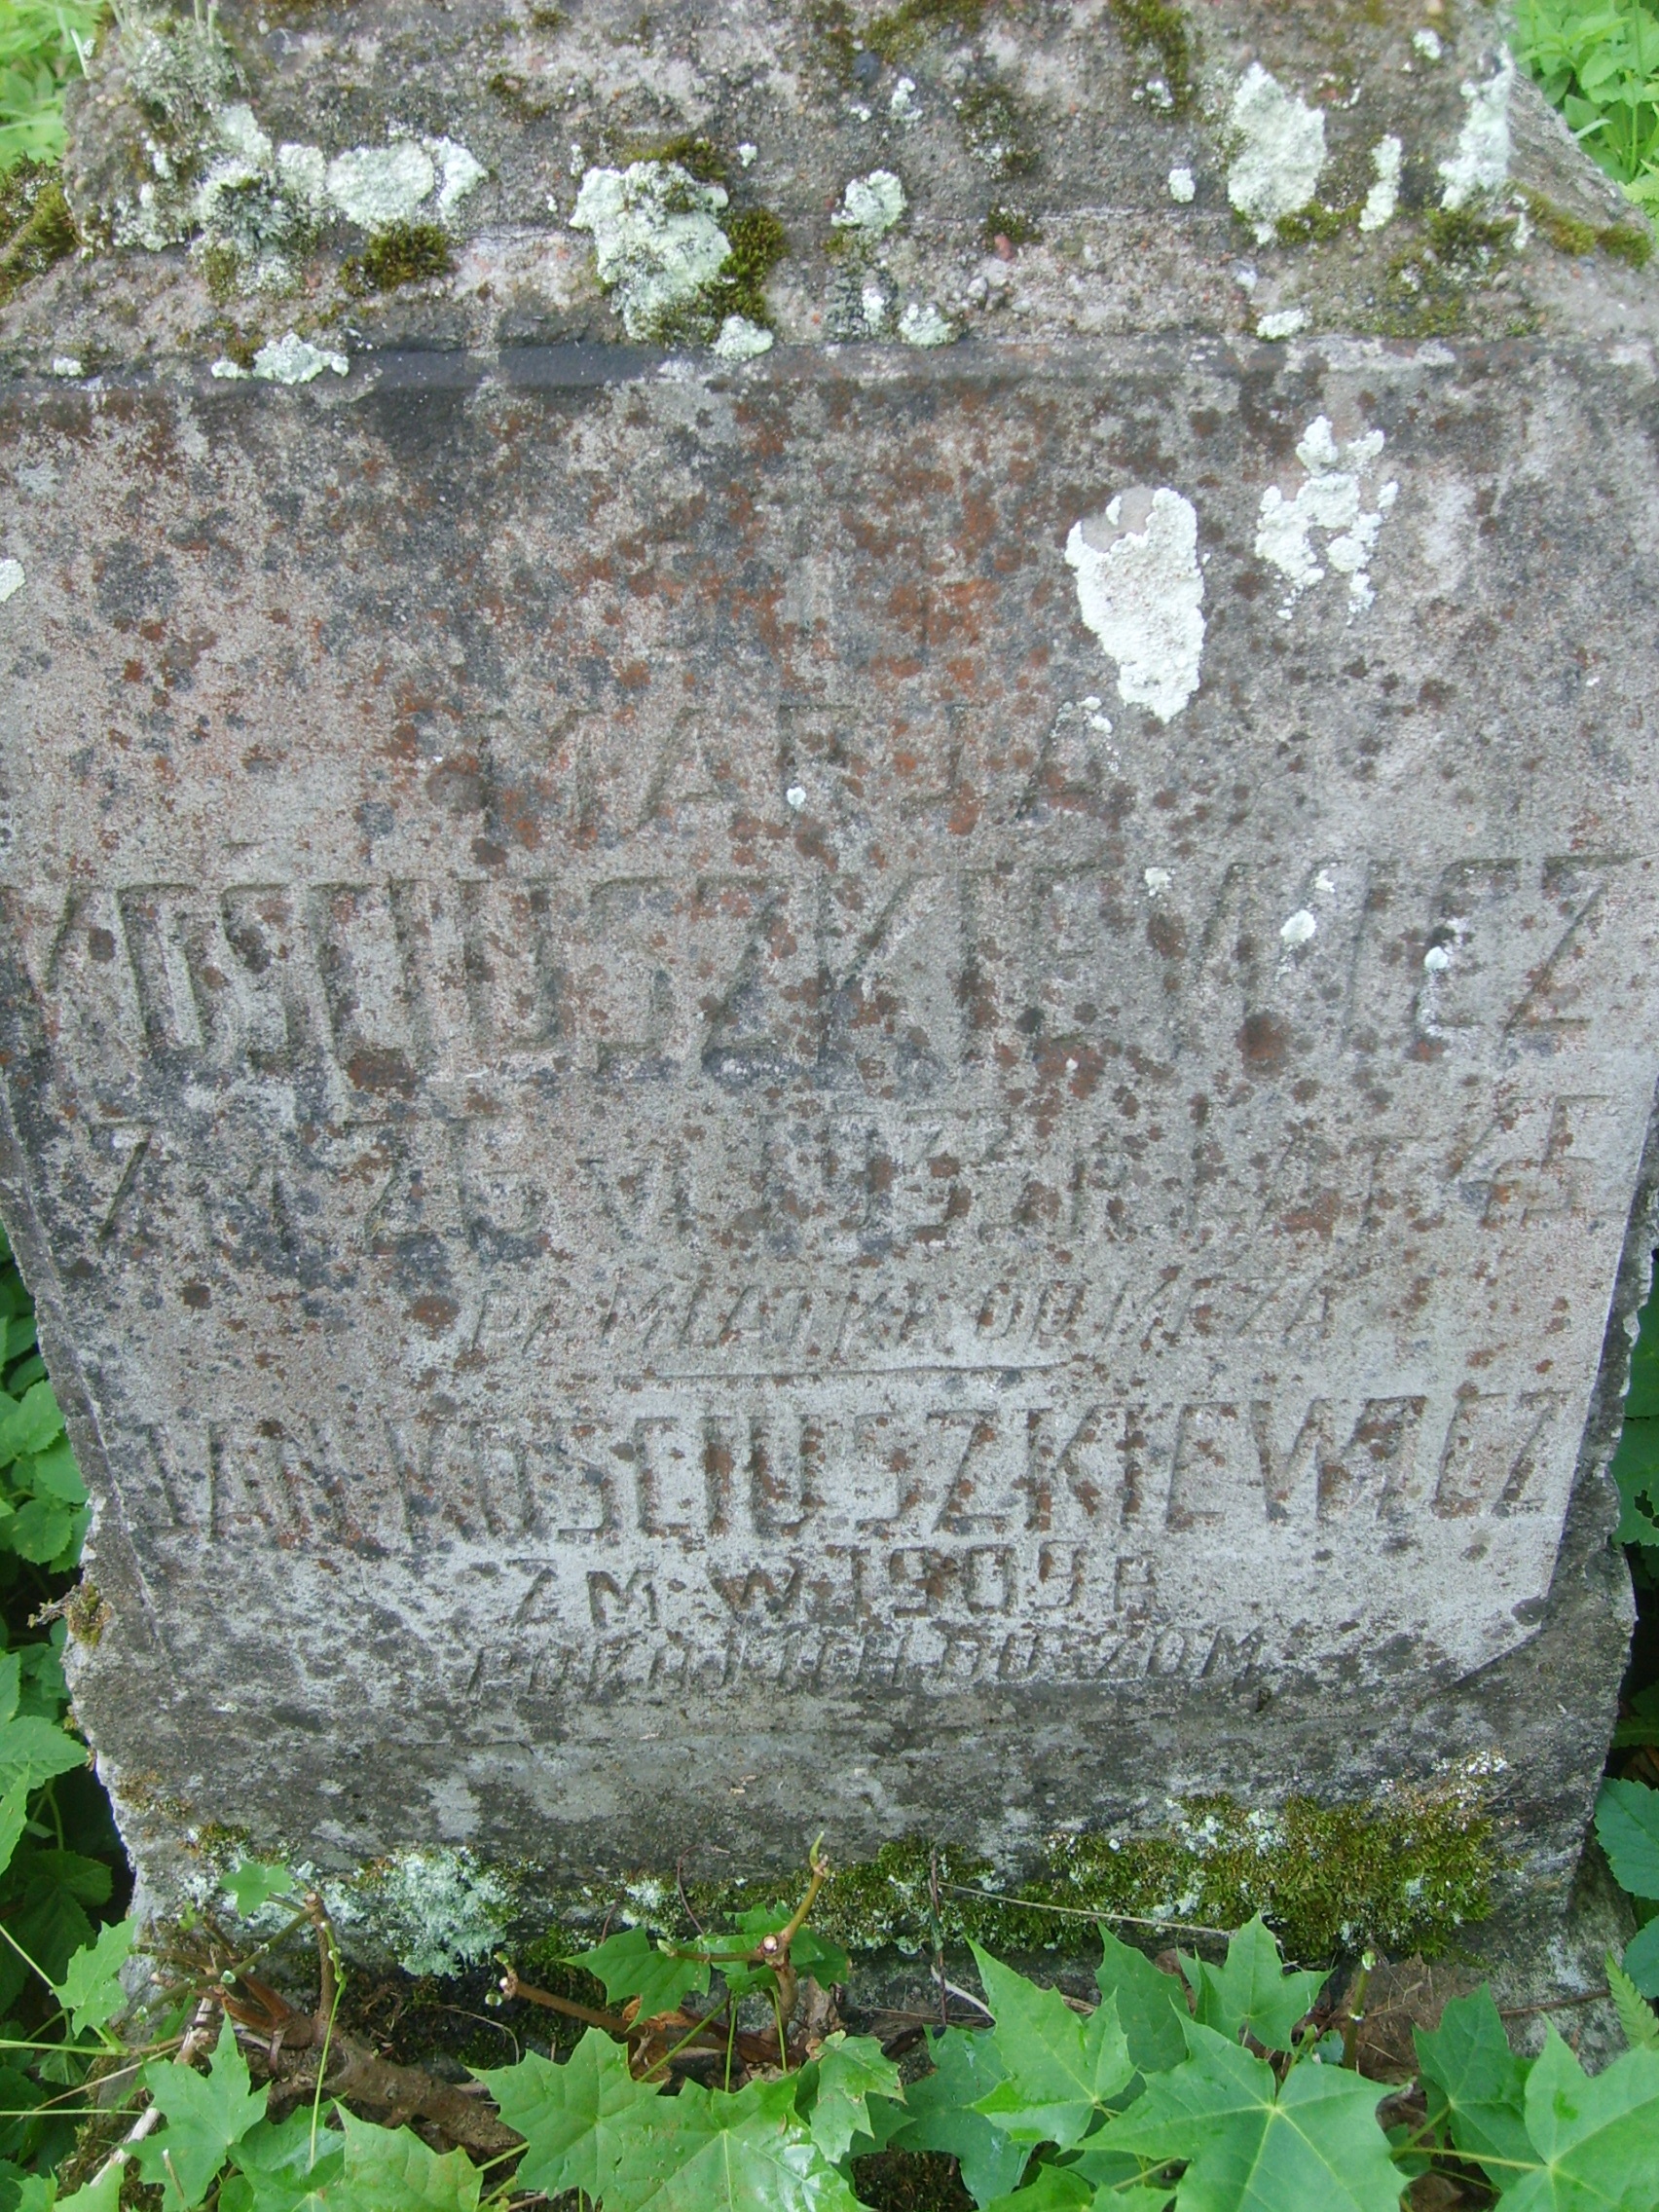 Fragment of the tombstone of Jan and Maria Kosciuszkiewicz from the Ross Cemetery in Vilnius, as of 2013.